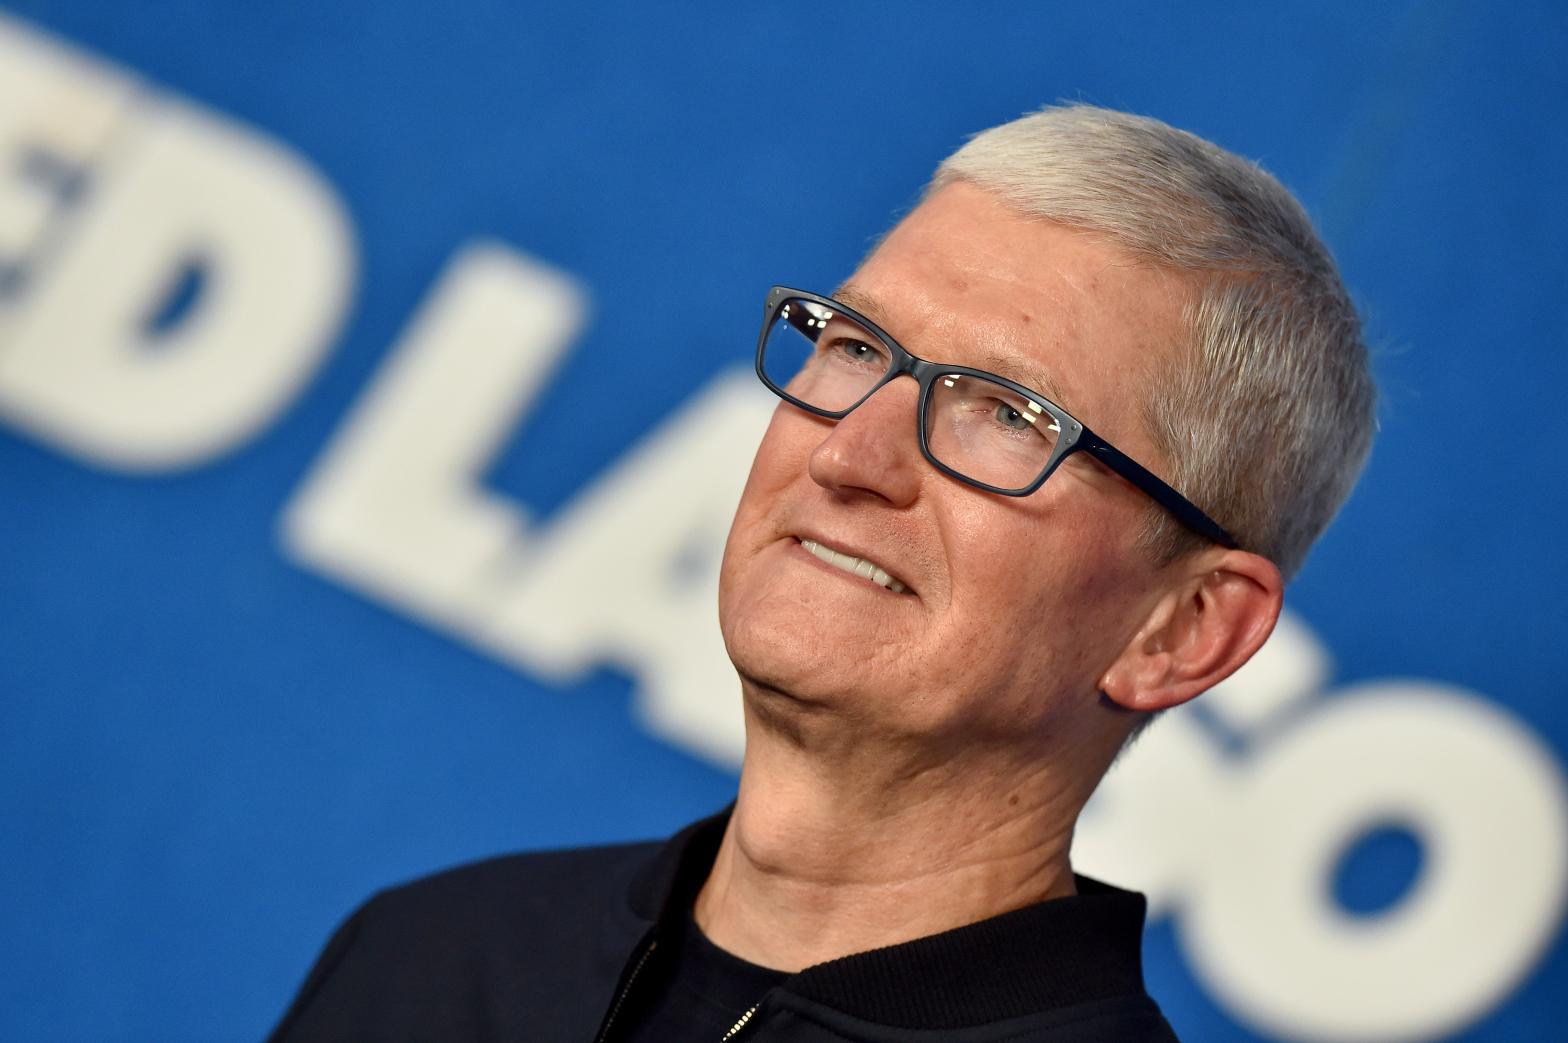 Apple CEO Tim Cook during Apple TV+'s premiere of Ted Lasso Season 2 in 2021. (Photo: Axelle/Bauer-Griffin/FilmMagic, Getty Images)